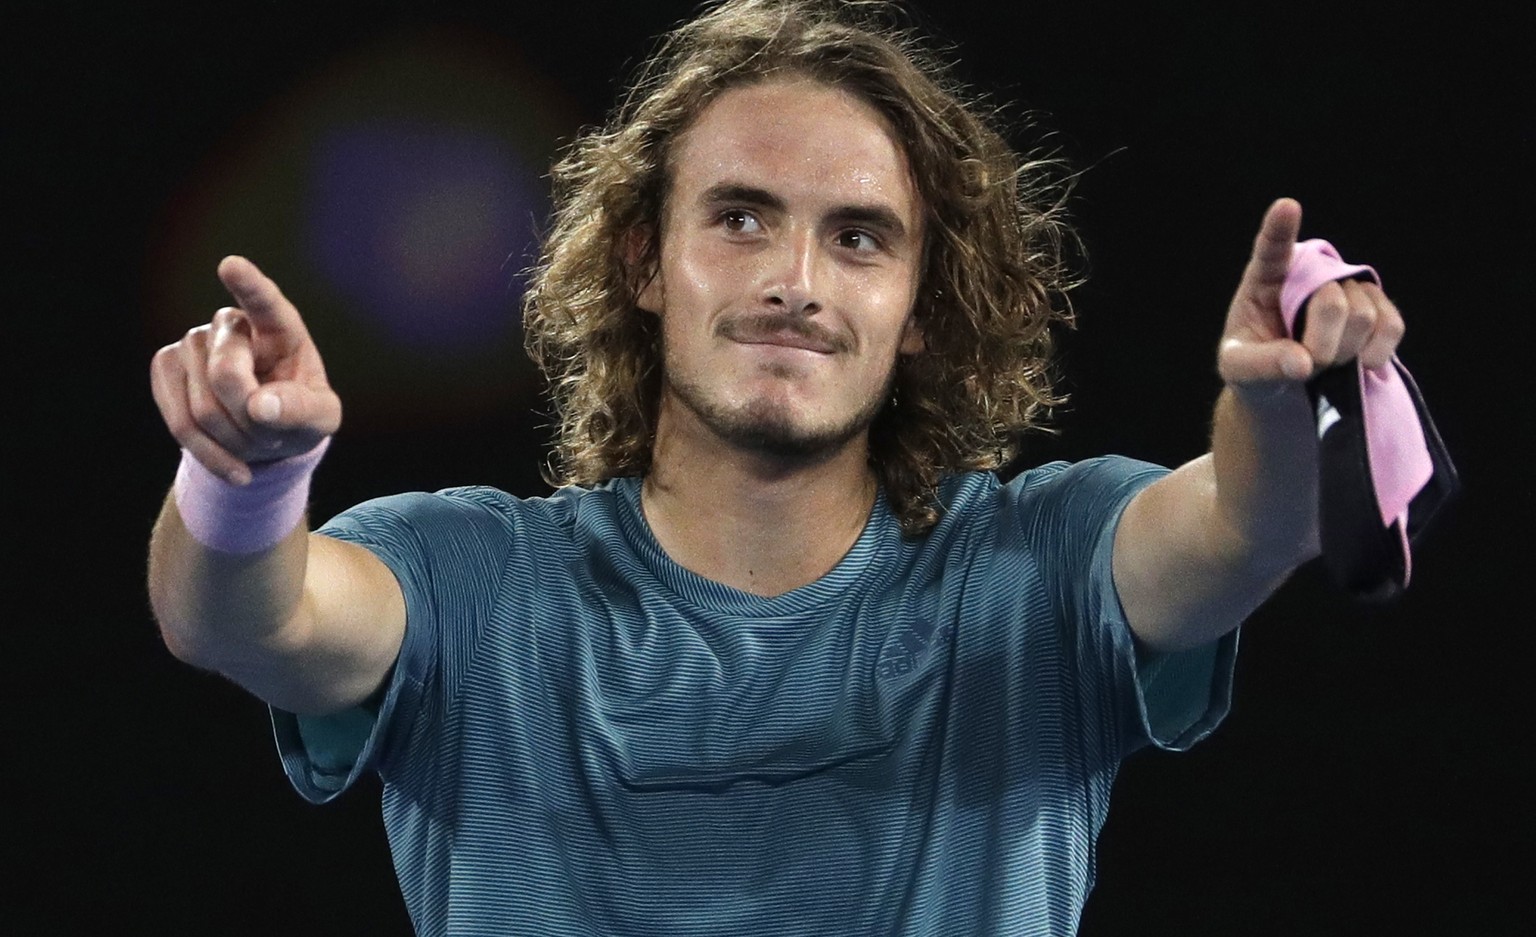 Greece&#039;s Stefanos Tsitsipas celebrates after defeating Switzerland&#039;s Roger Federer in their fourth round match at the Australian Open tennis championships in Melbourne, Australia, Sunday, Ja ...